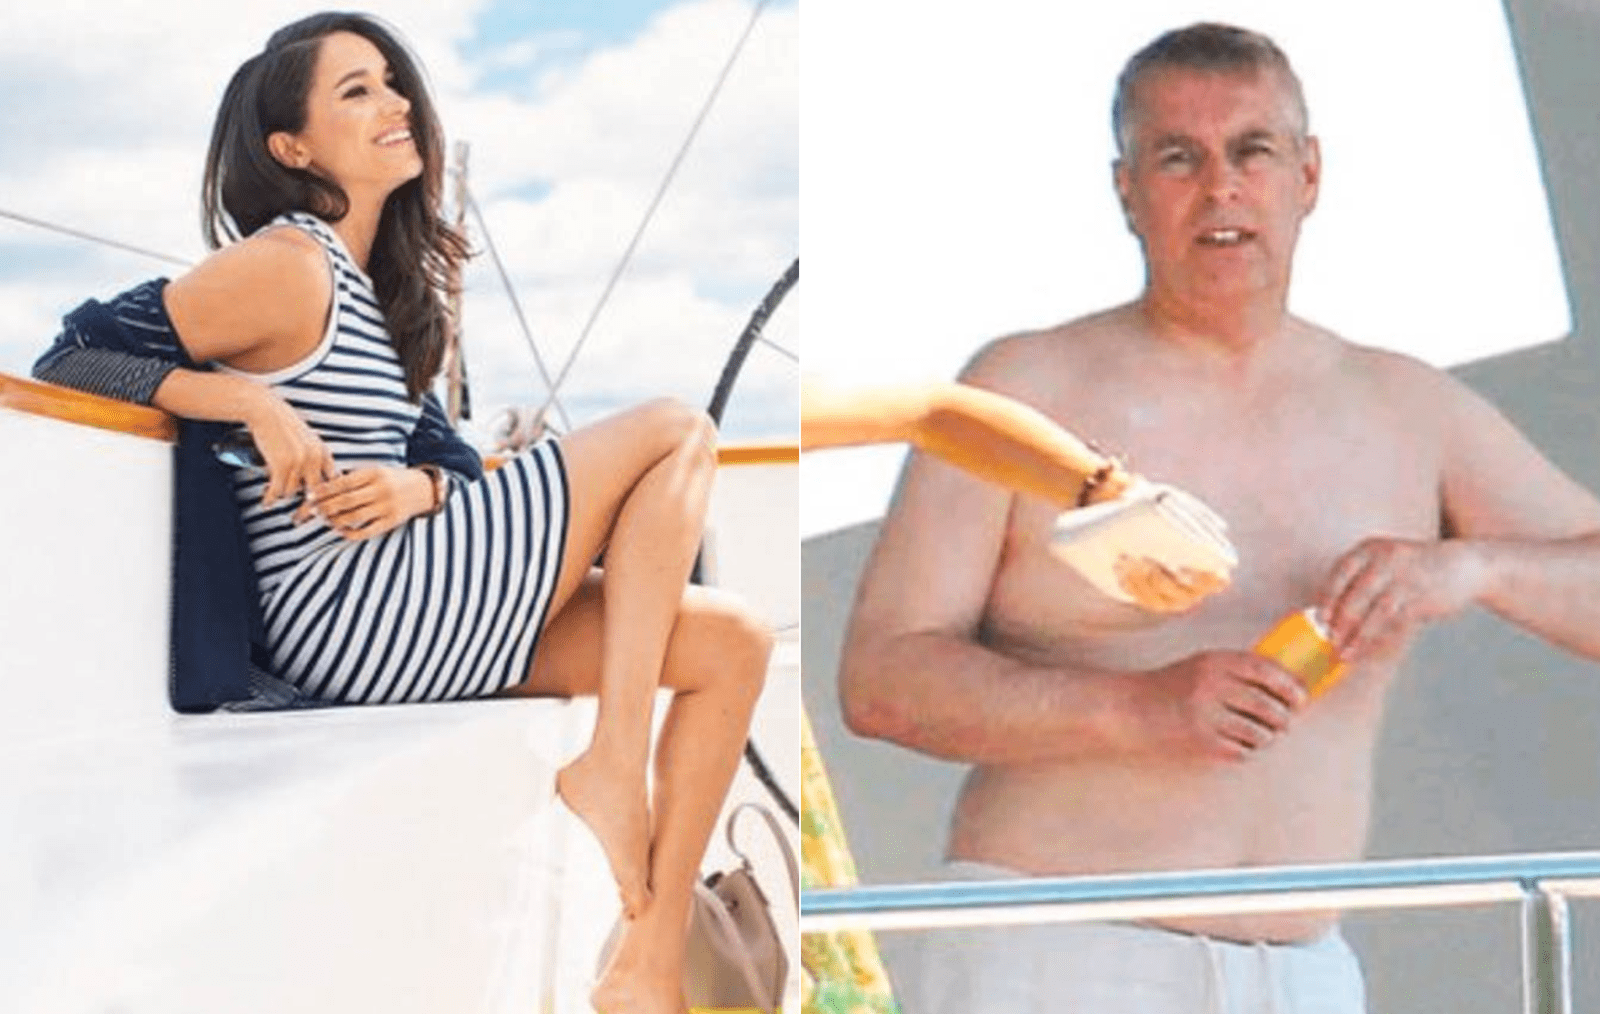 Was Mad Meghan Markle Yacht Girl For Randy Andy In 2000s?